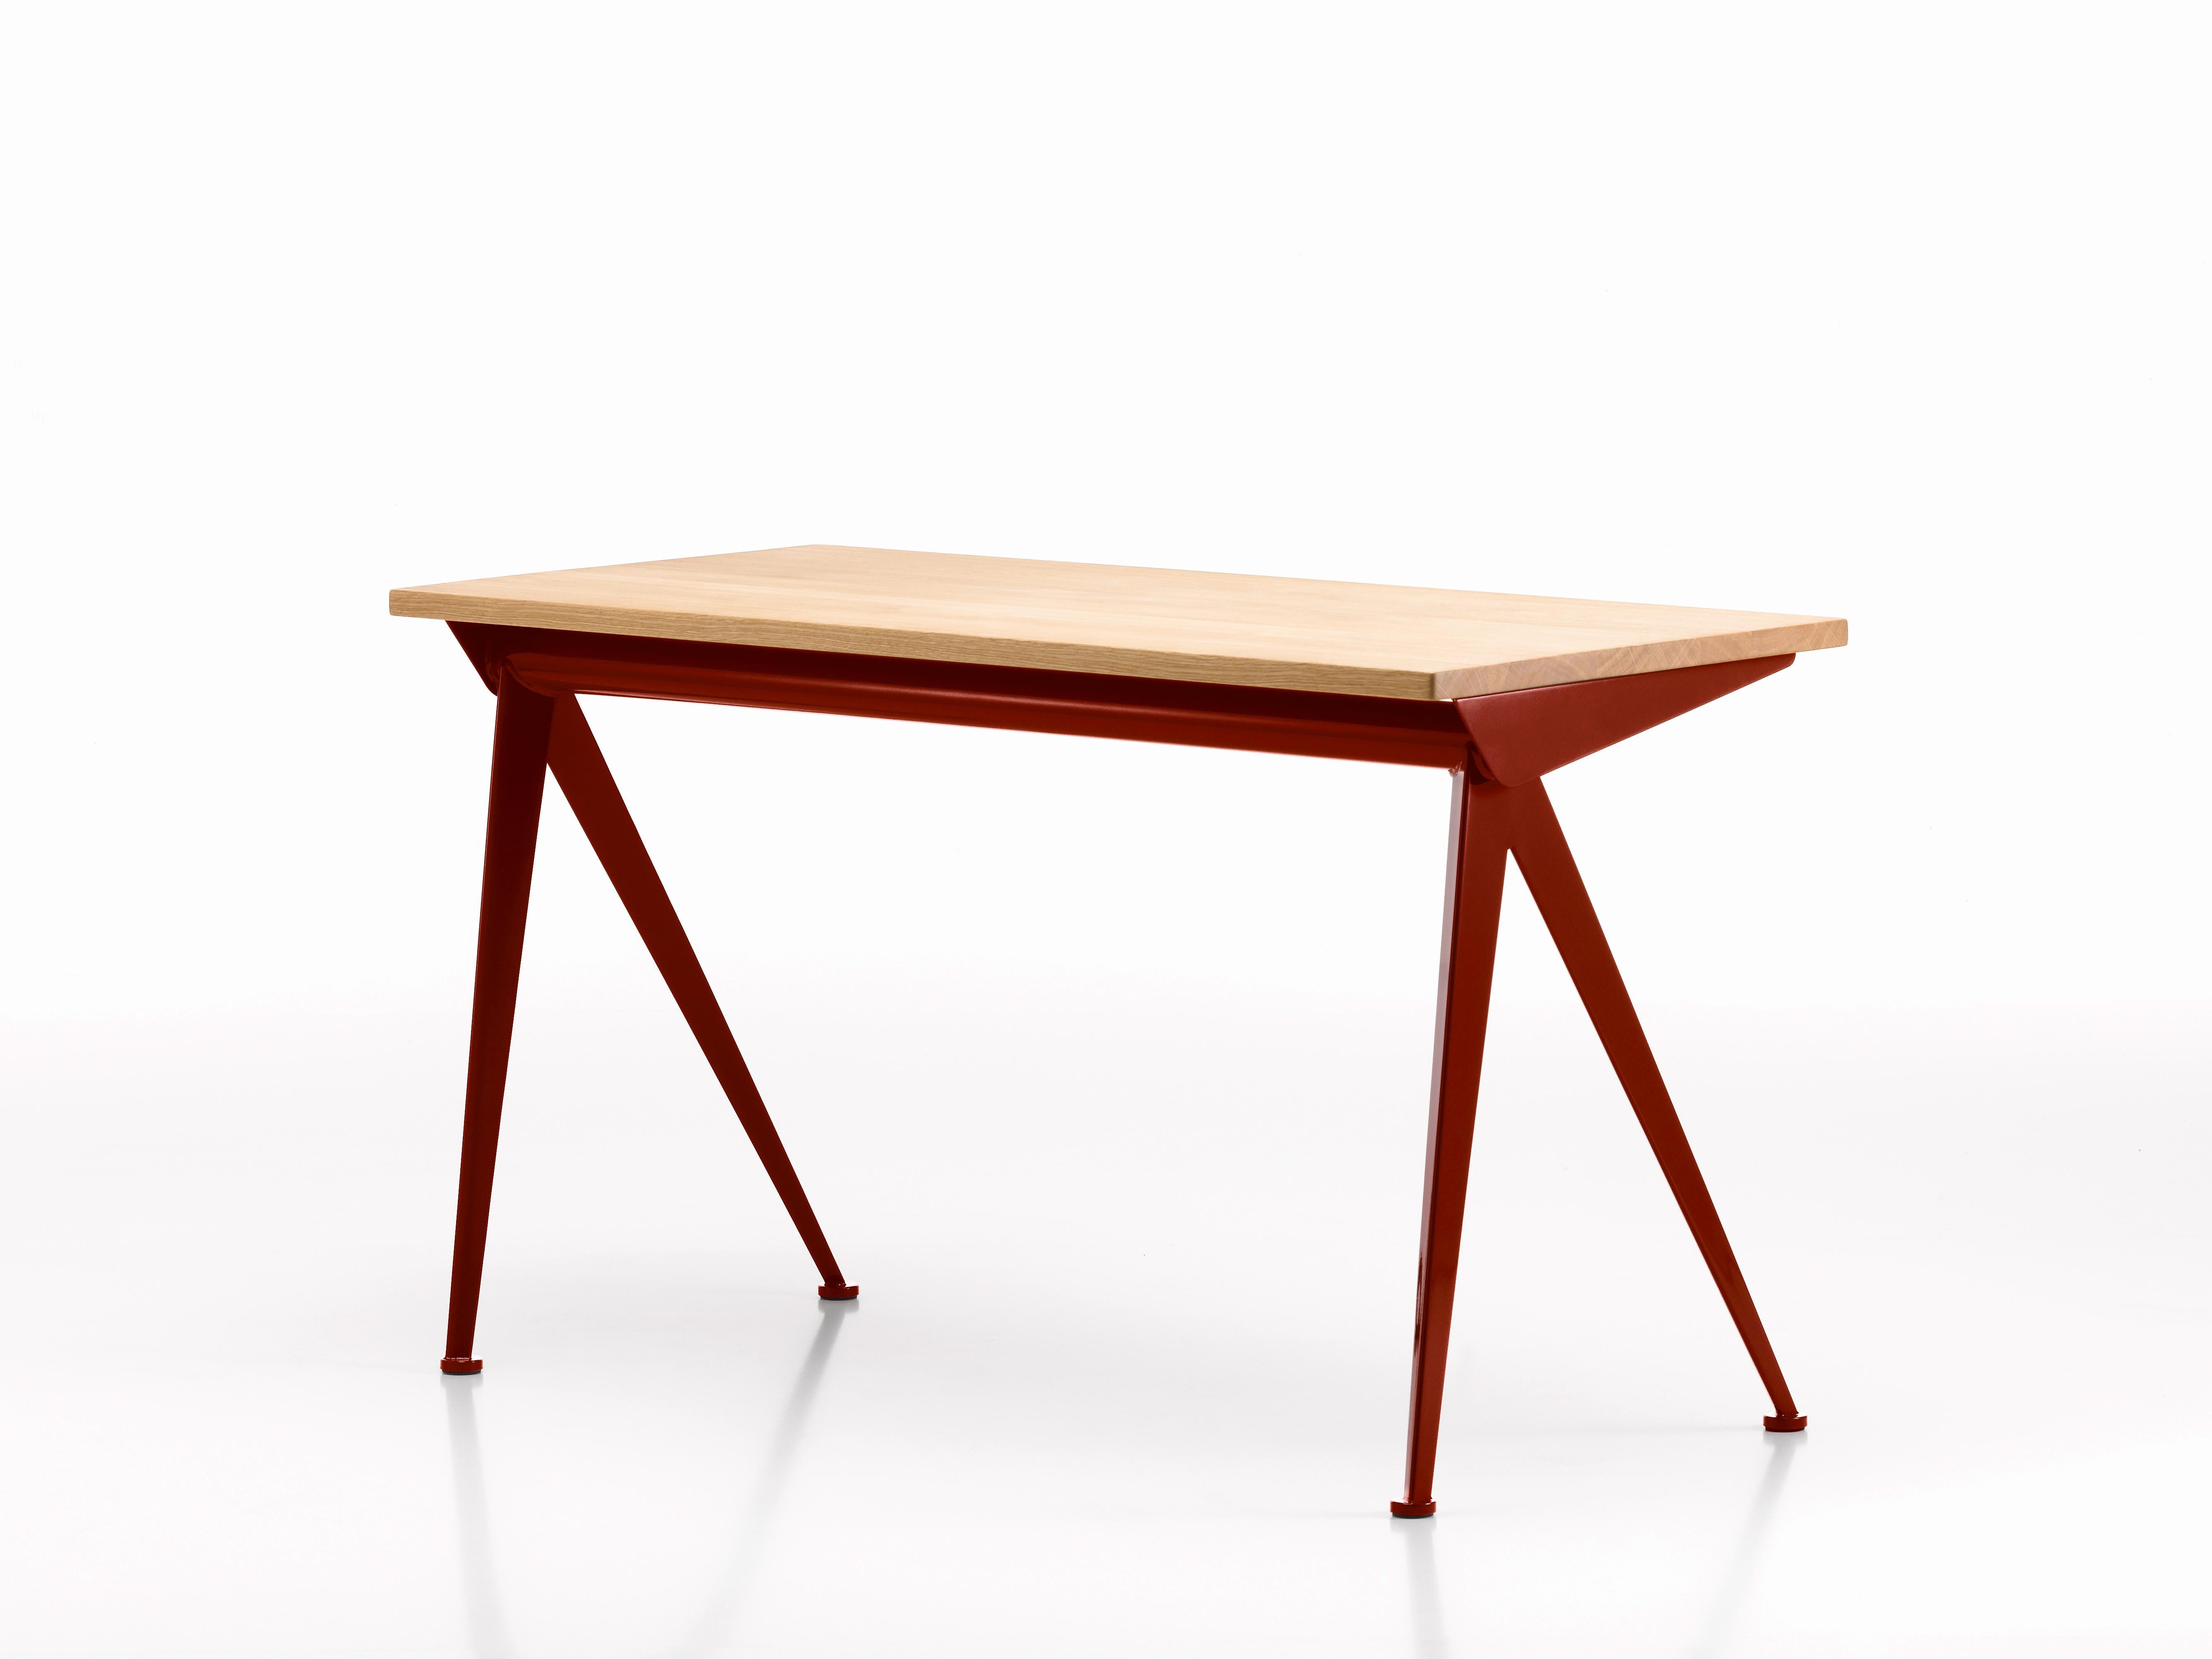 Jean Prouvé compas direction desk in natural oak and Japanese red metal for Vitra. Originally designed in 1953, Prouvé's iconic desk is based the design on the structural principles for which he is known. Common to all of them are the slender,